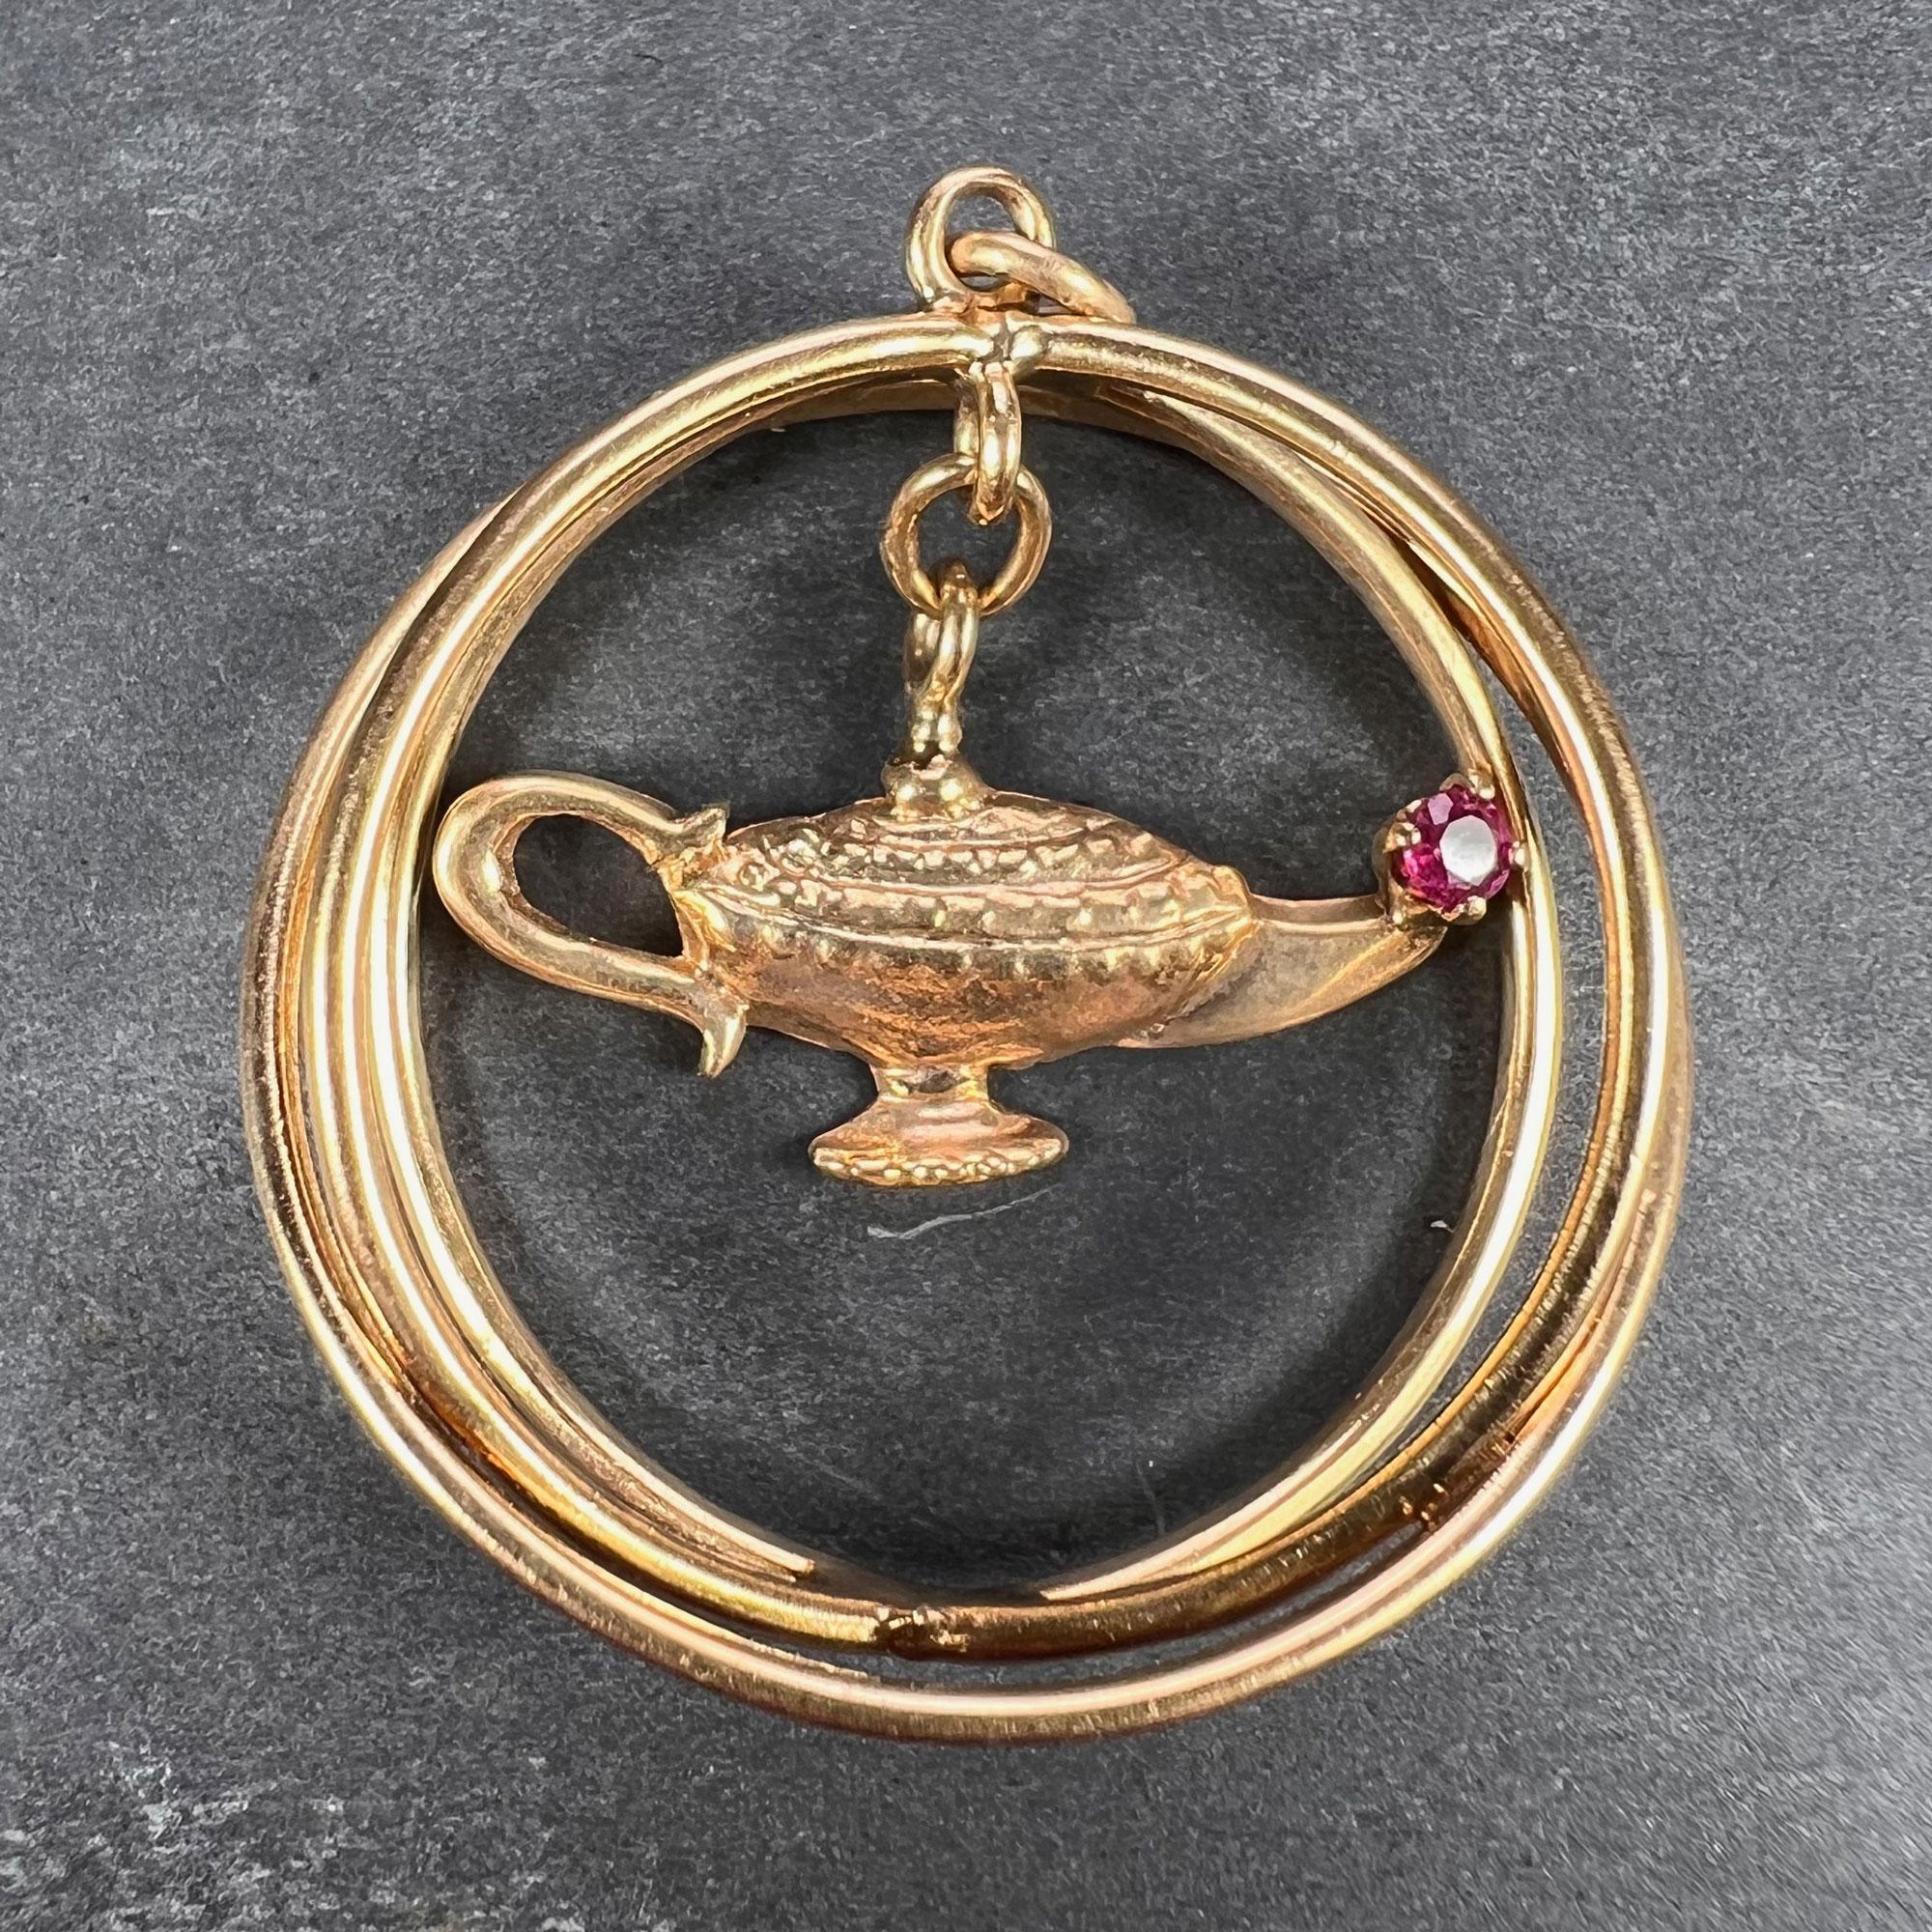 A large 14 karat yellow gold charm pendant designed as three interlaced hoops suspending a kinetic genie lamp with a red ruby set in the spout. The ruby is estimated to weigh 0.10 carats. Stamped 14K.

Dimensions: 3.3 x 3.8 cm
Weight: 7.93 grams